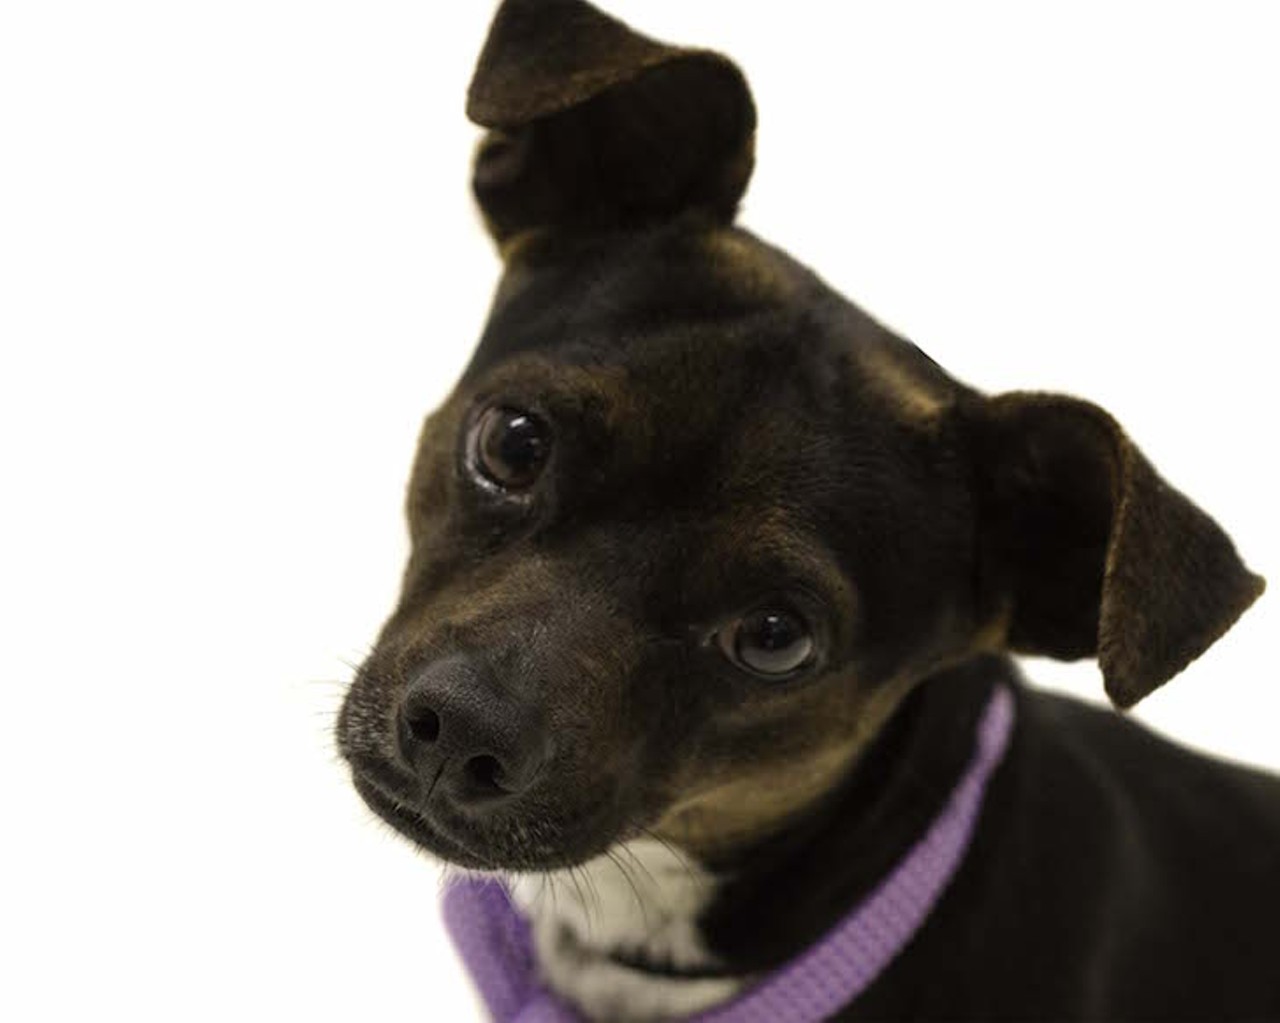 17 adoptable pooches looking for a new human